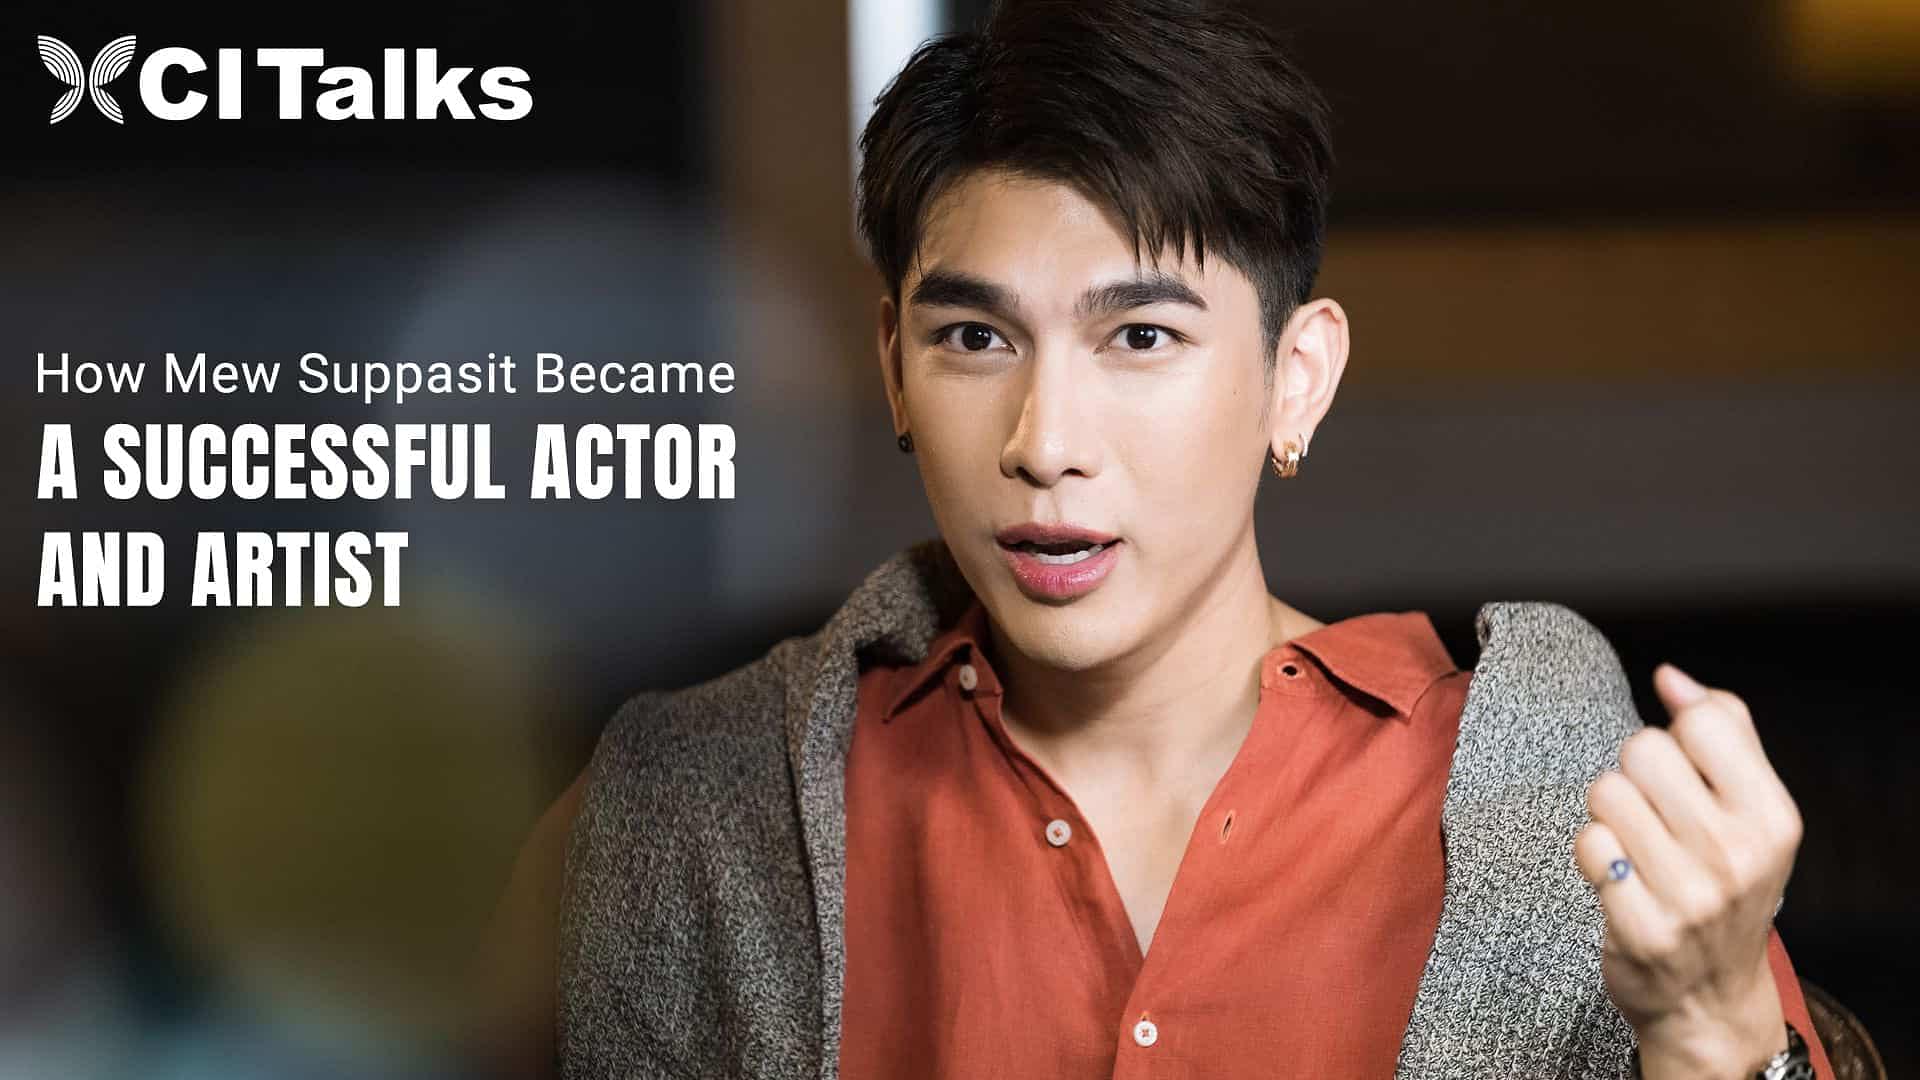 How Mew Suppasit Became a Successful Actor & Artist